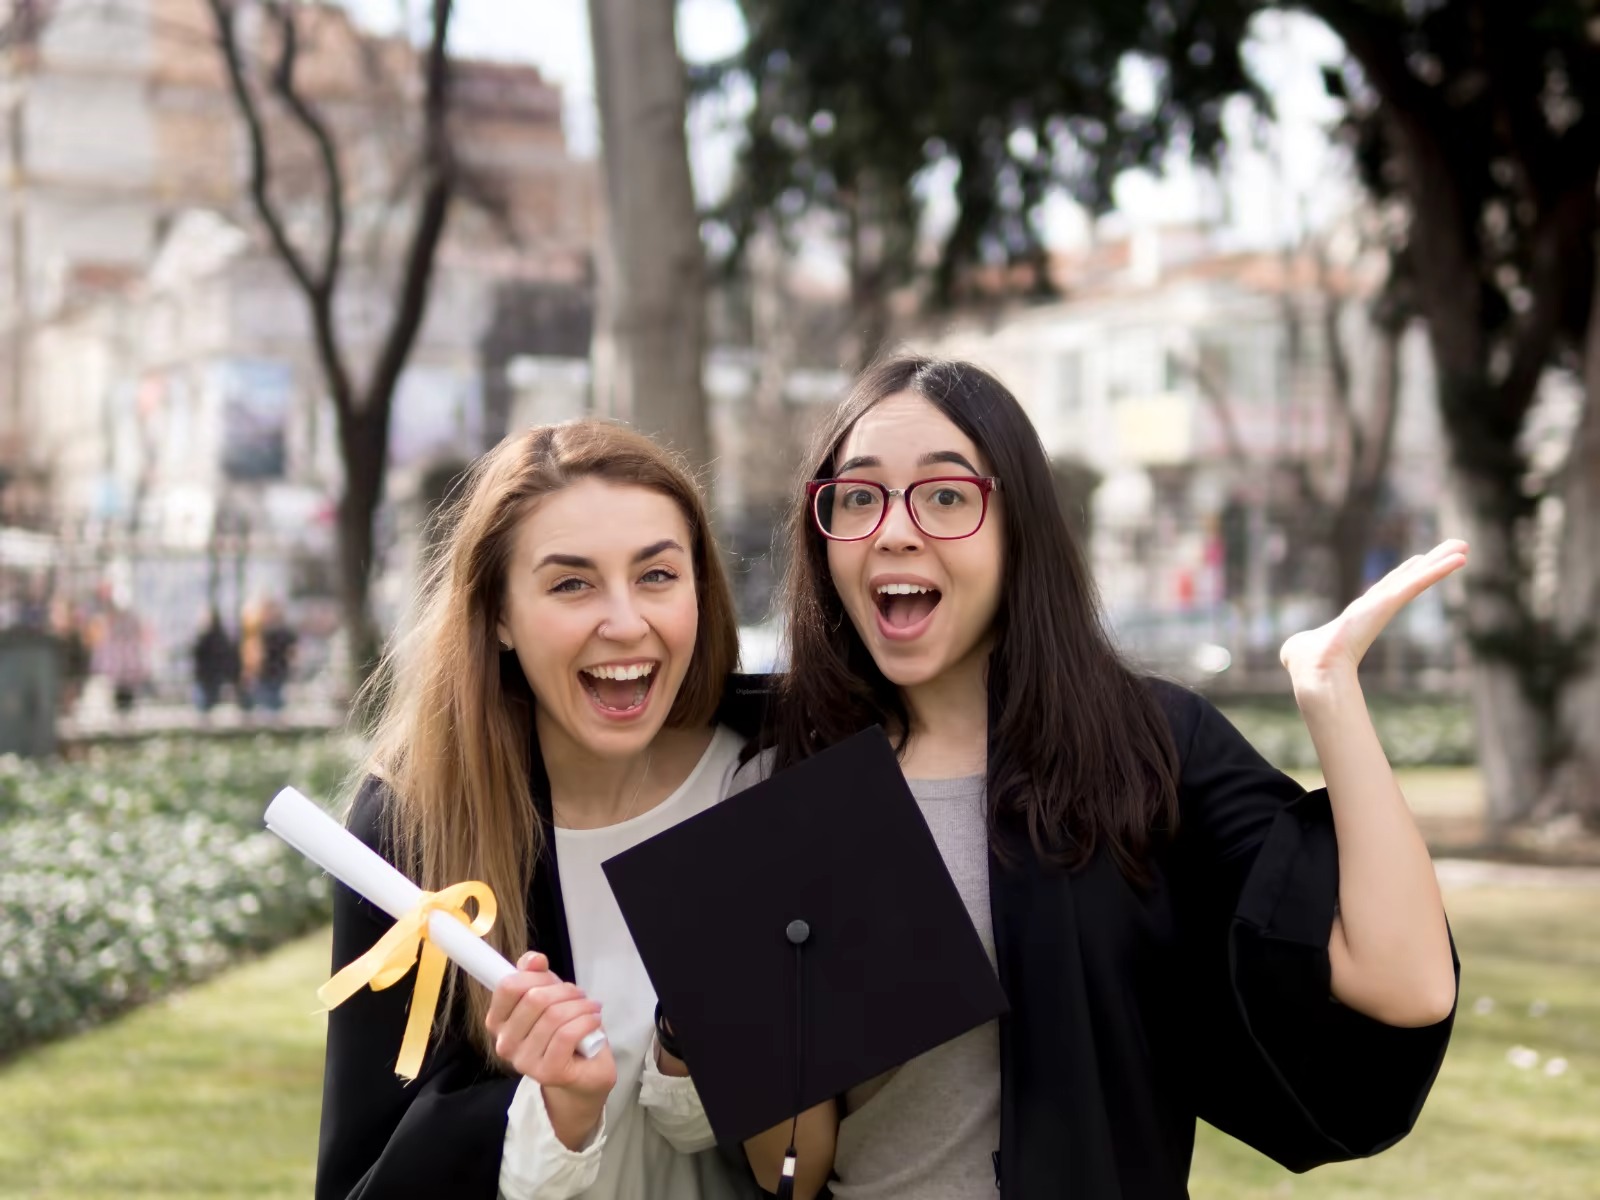 Two young ladies proudly carry their diplomas as they celebrate their graduation